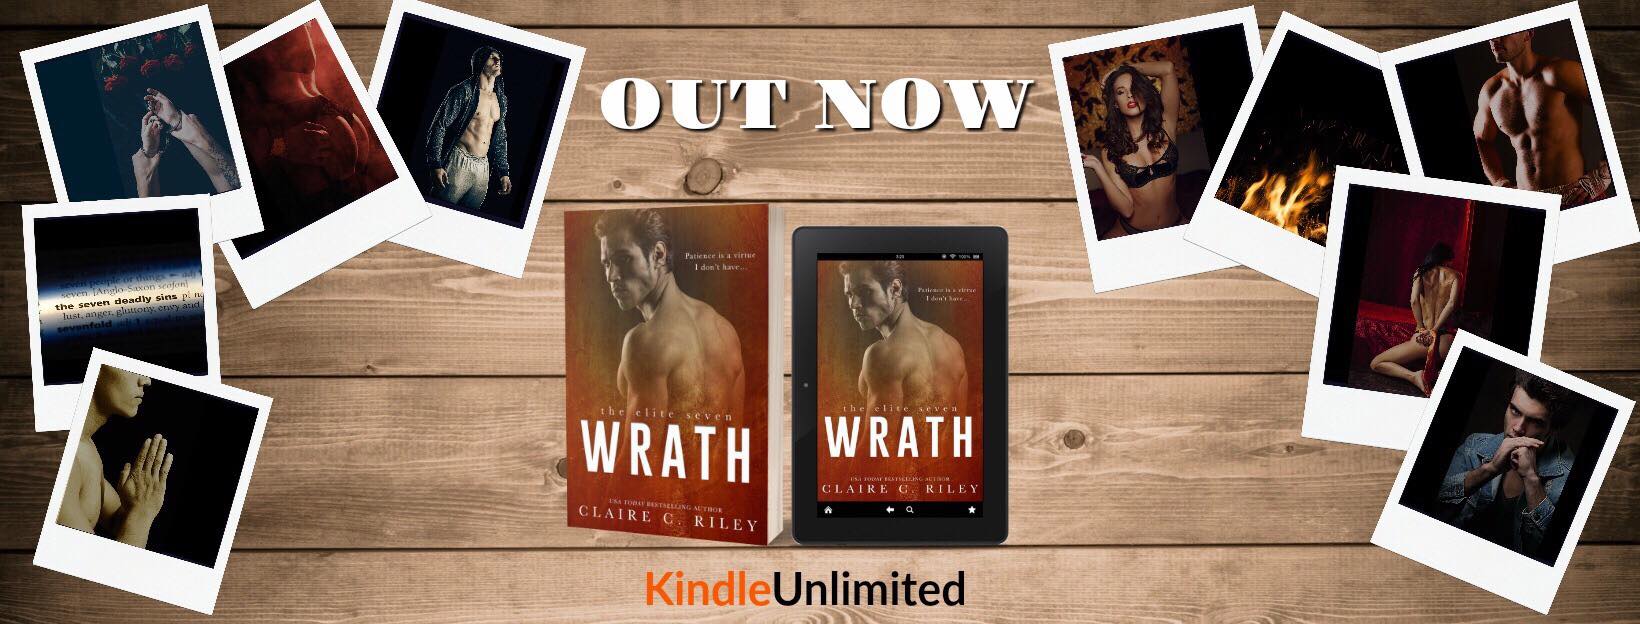 Wrath by Claire C. Riley Release Review